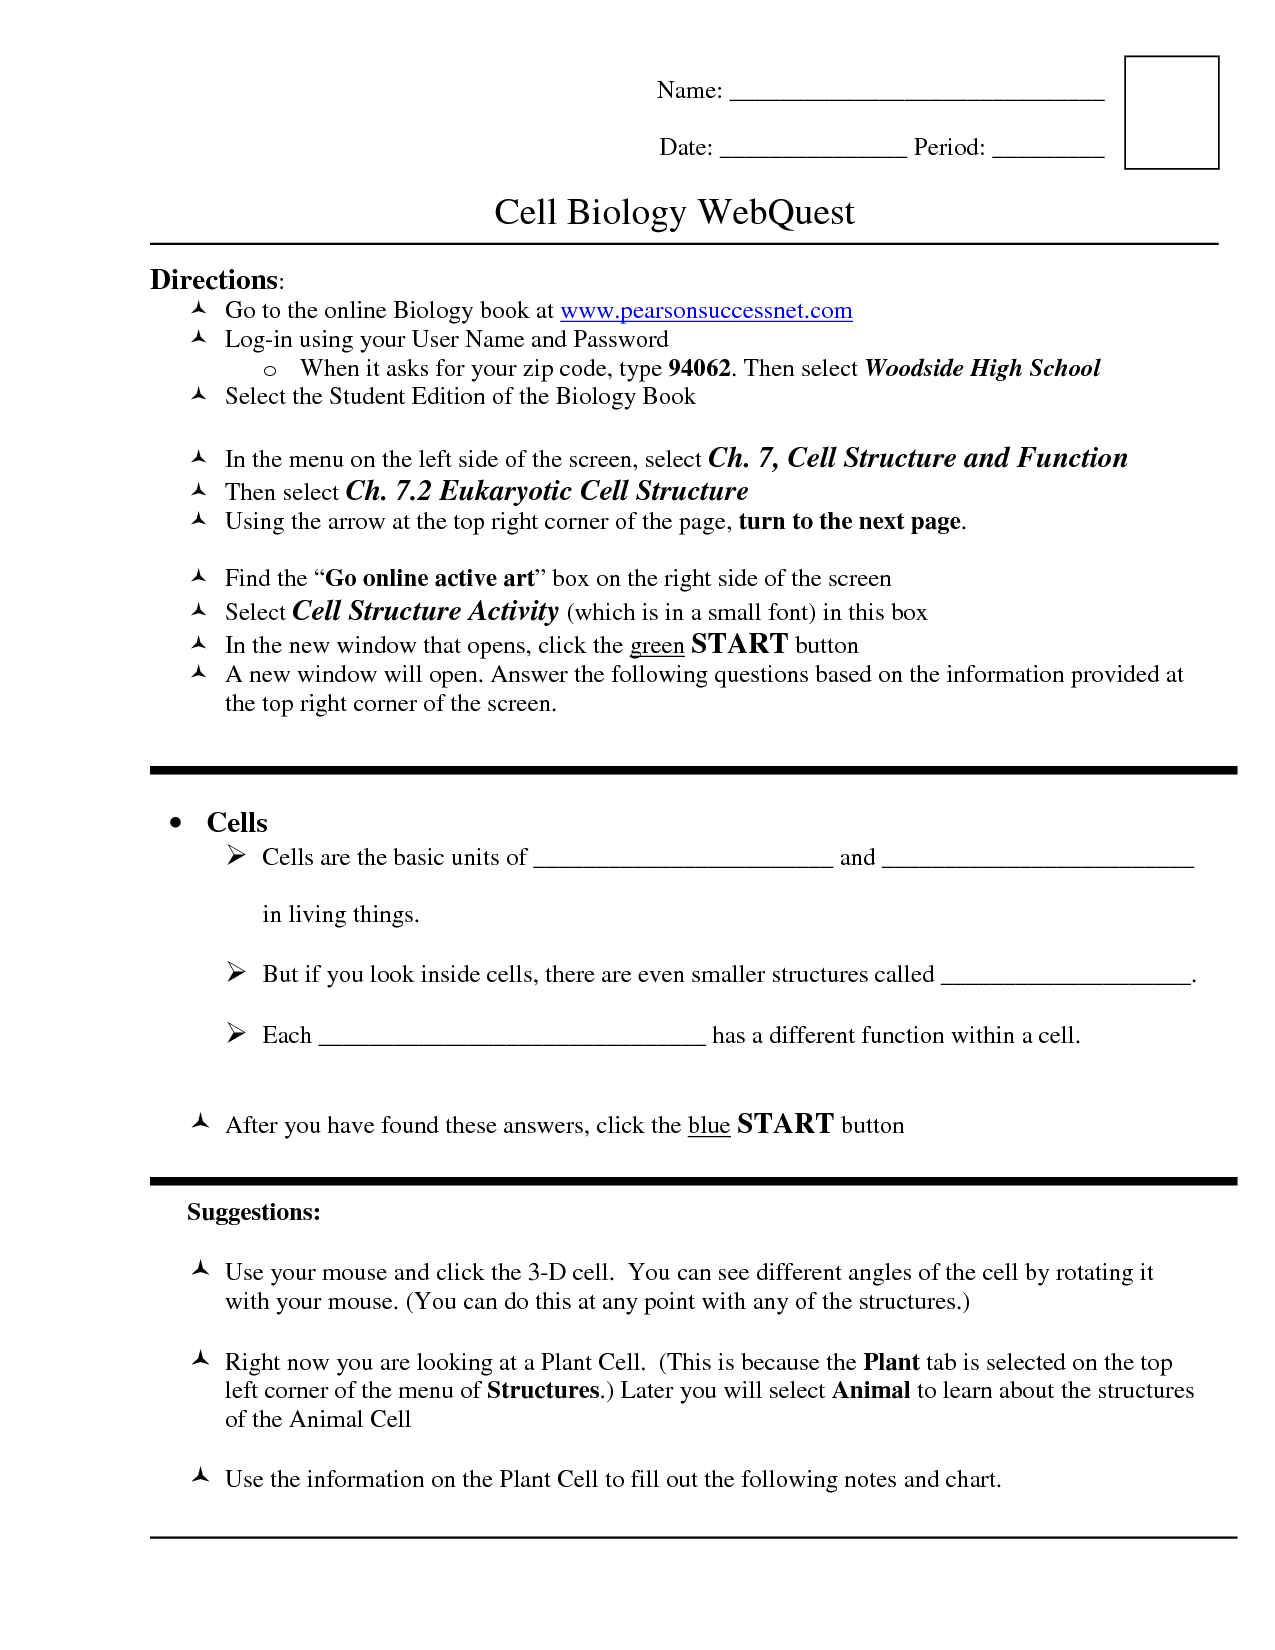 Prentice Hall Biology Worksheets Answers Image